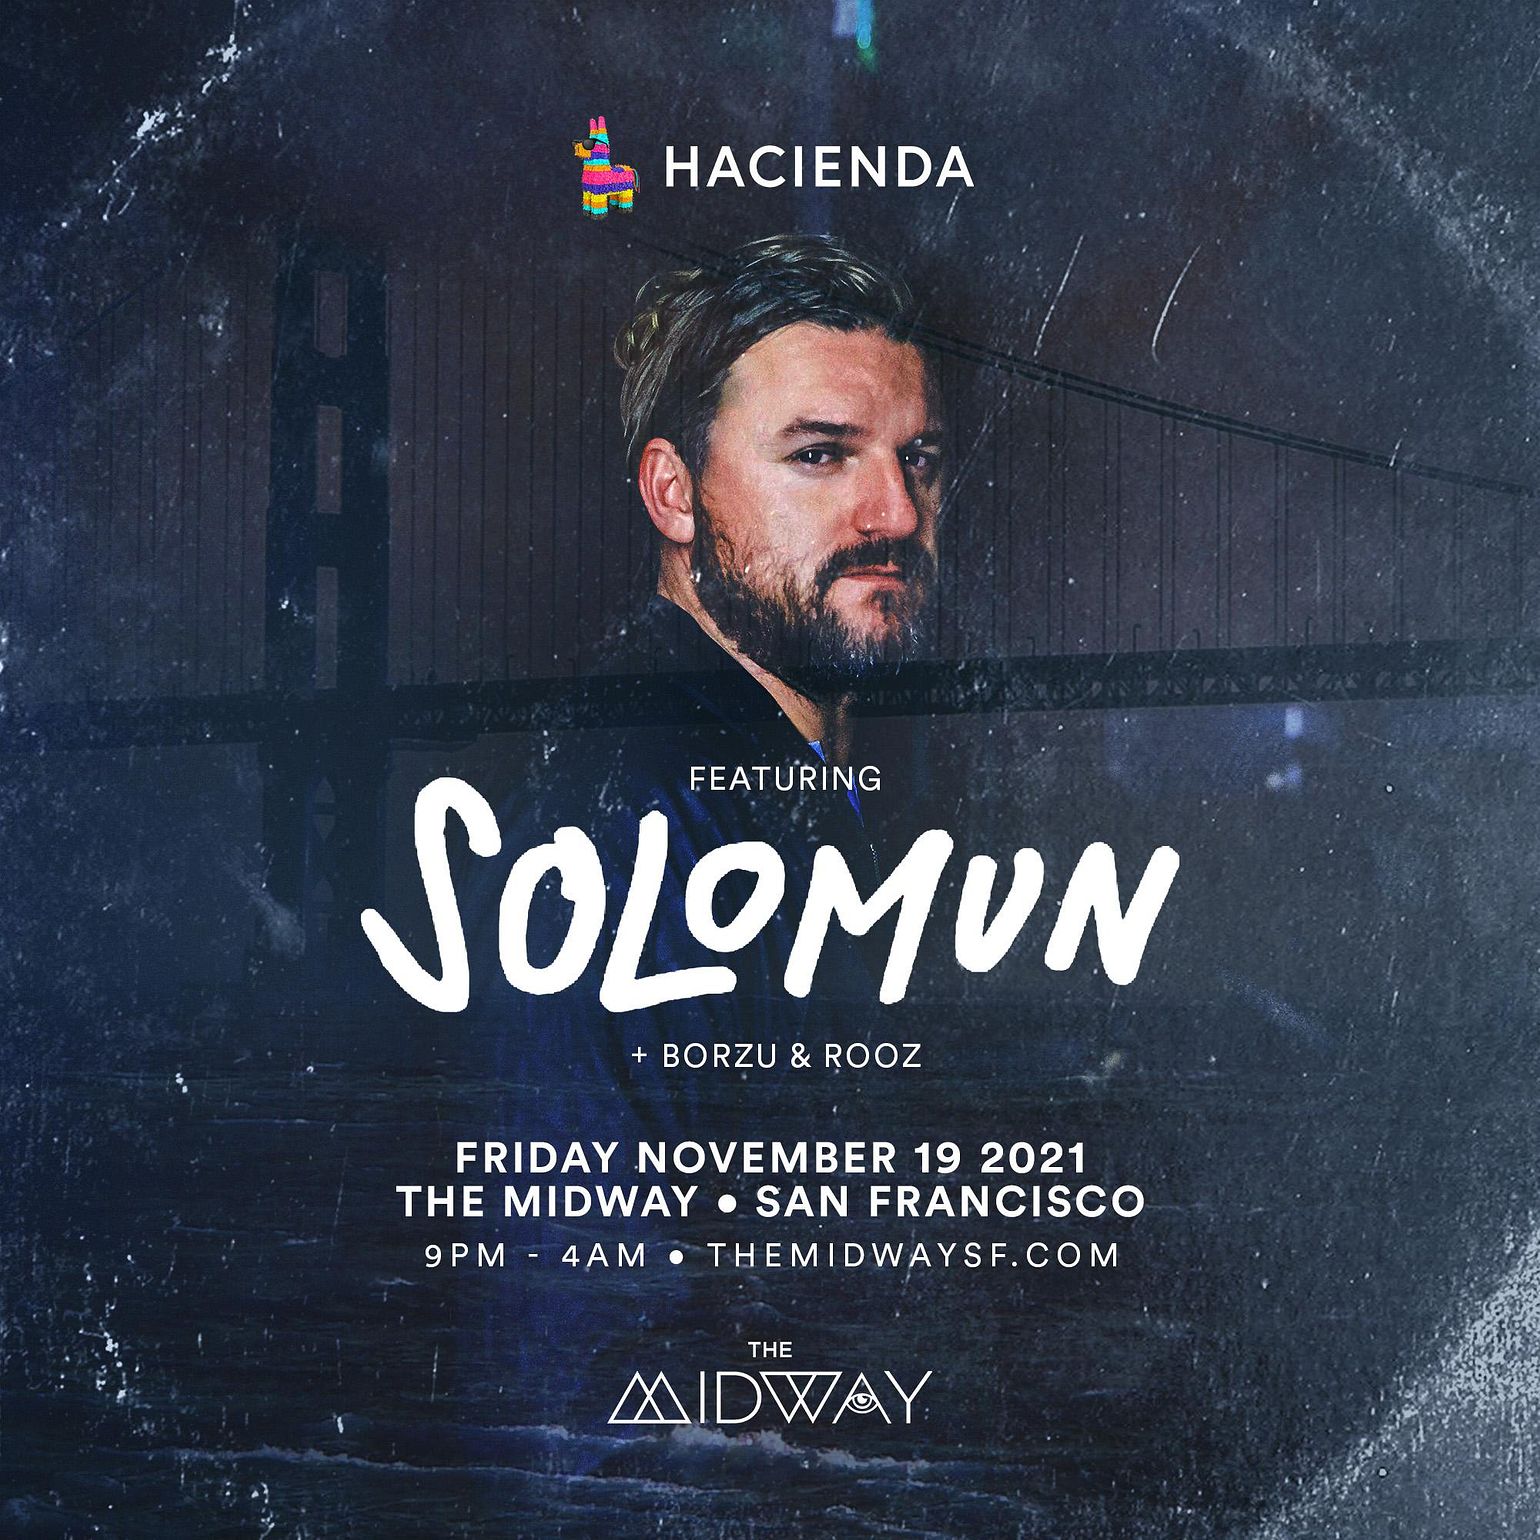 Solomun Tickets at The Midway in San Francisco by The Midway SF Tixr